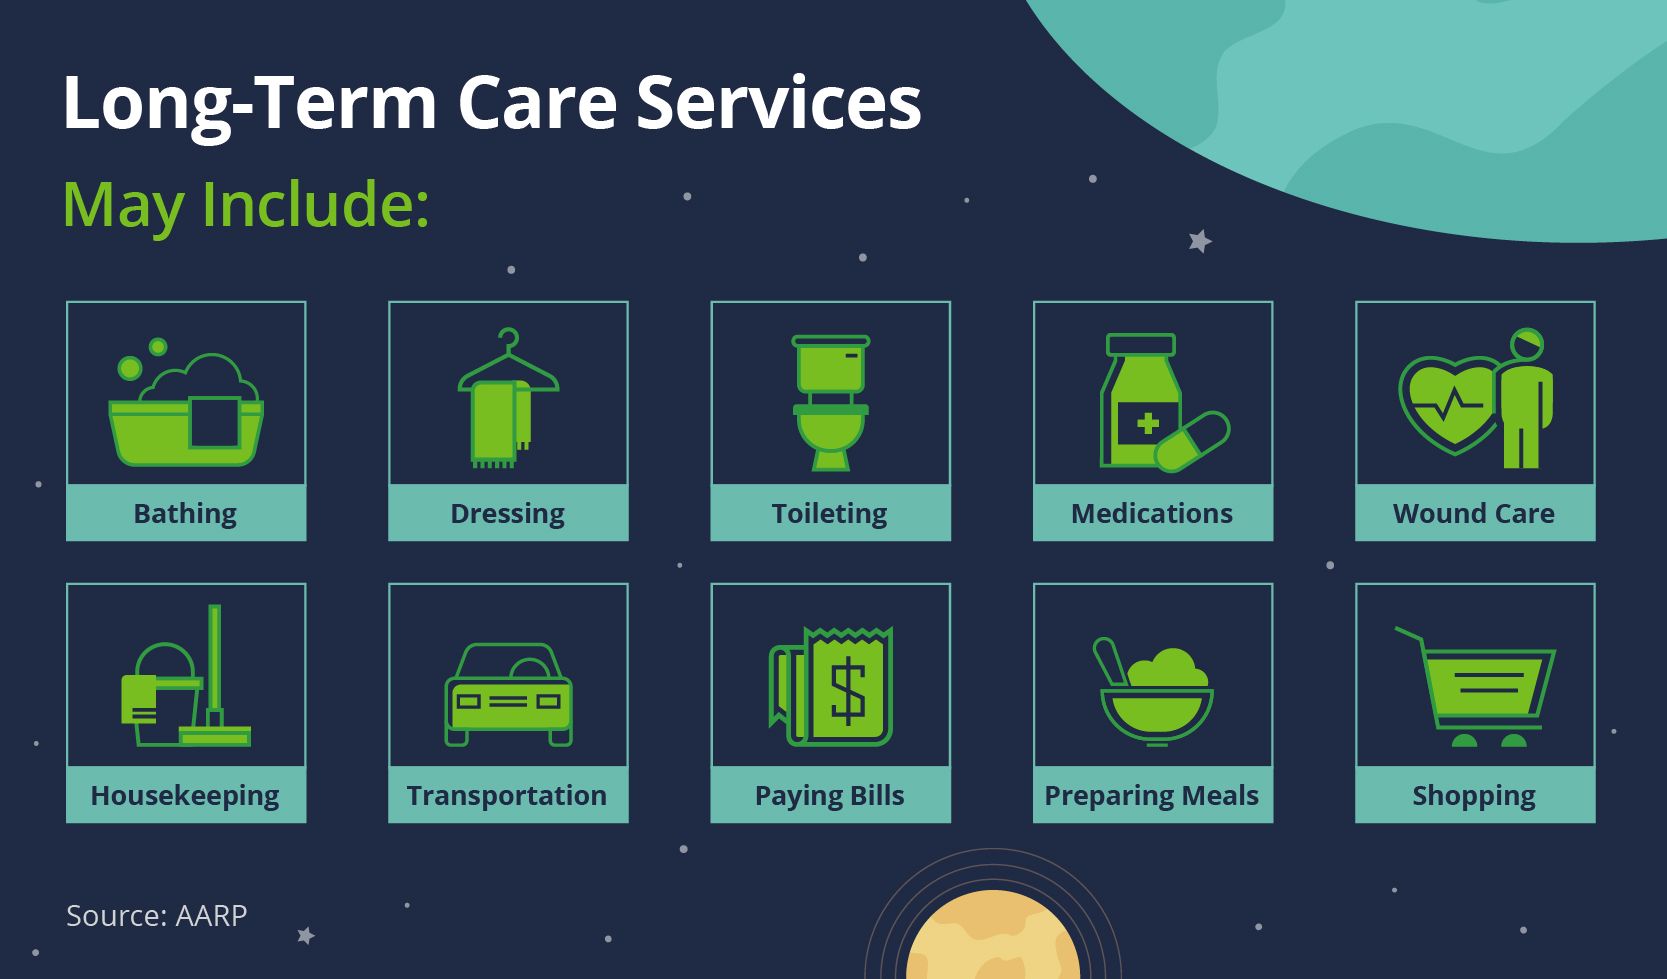 Long-Term Care Services include bathing, dressing, toileting, medications